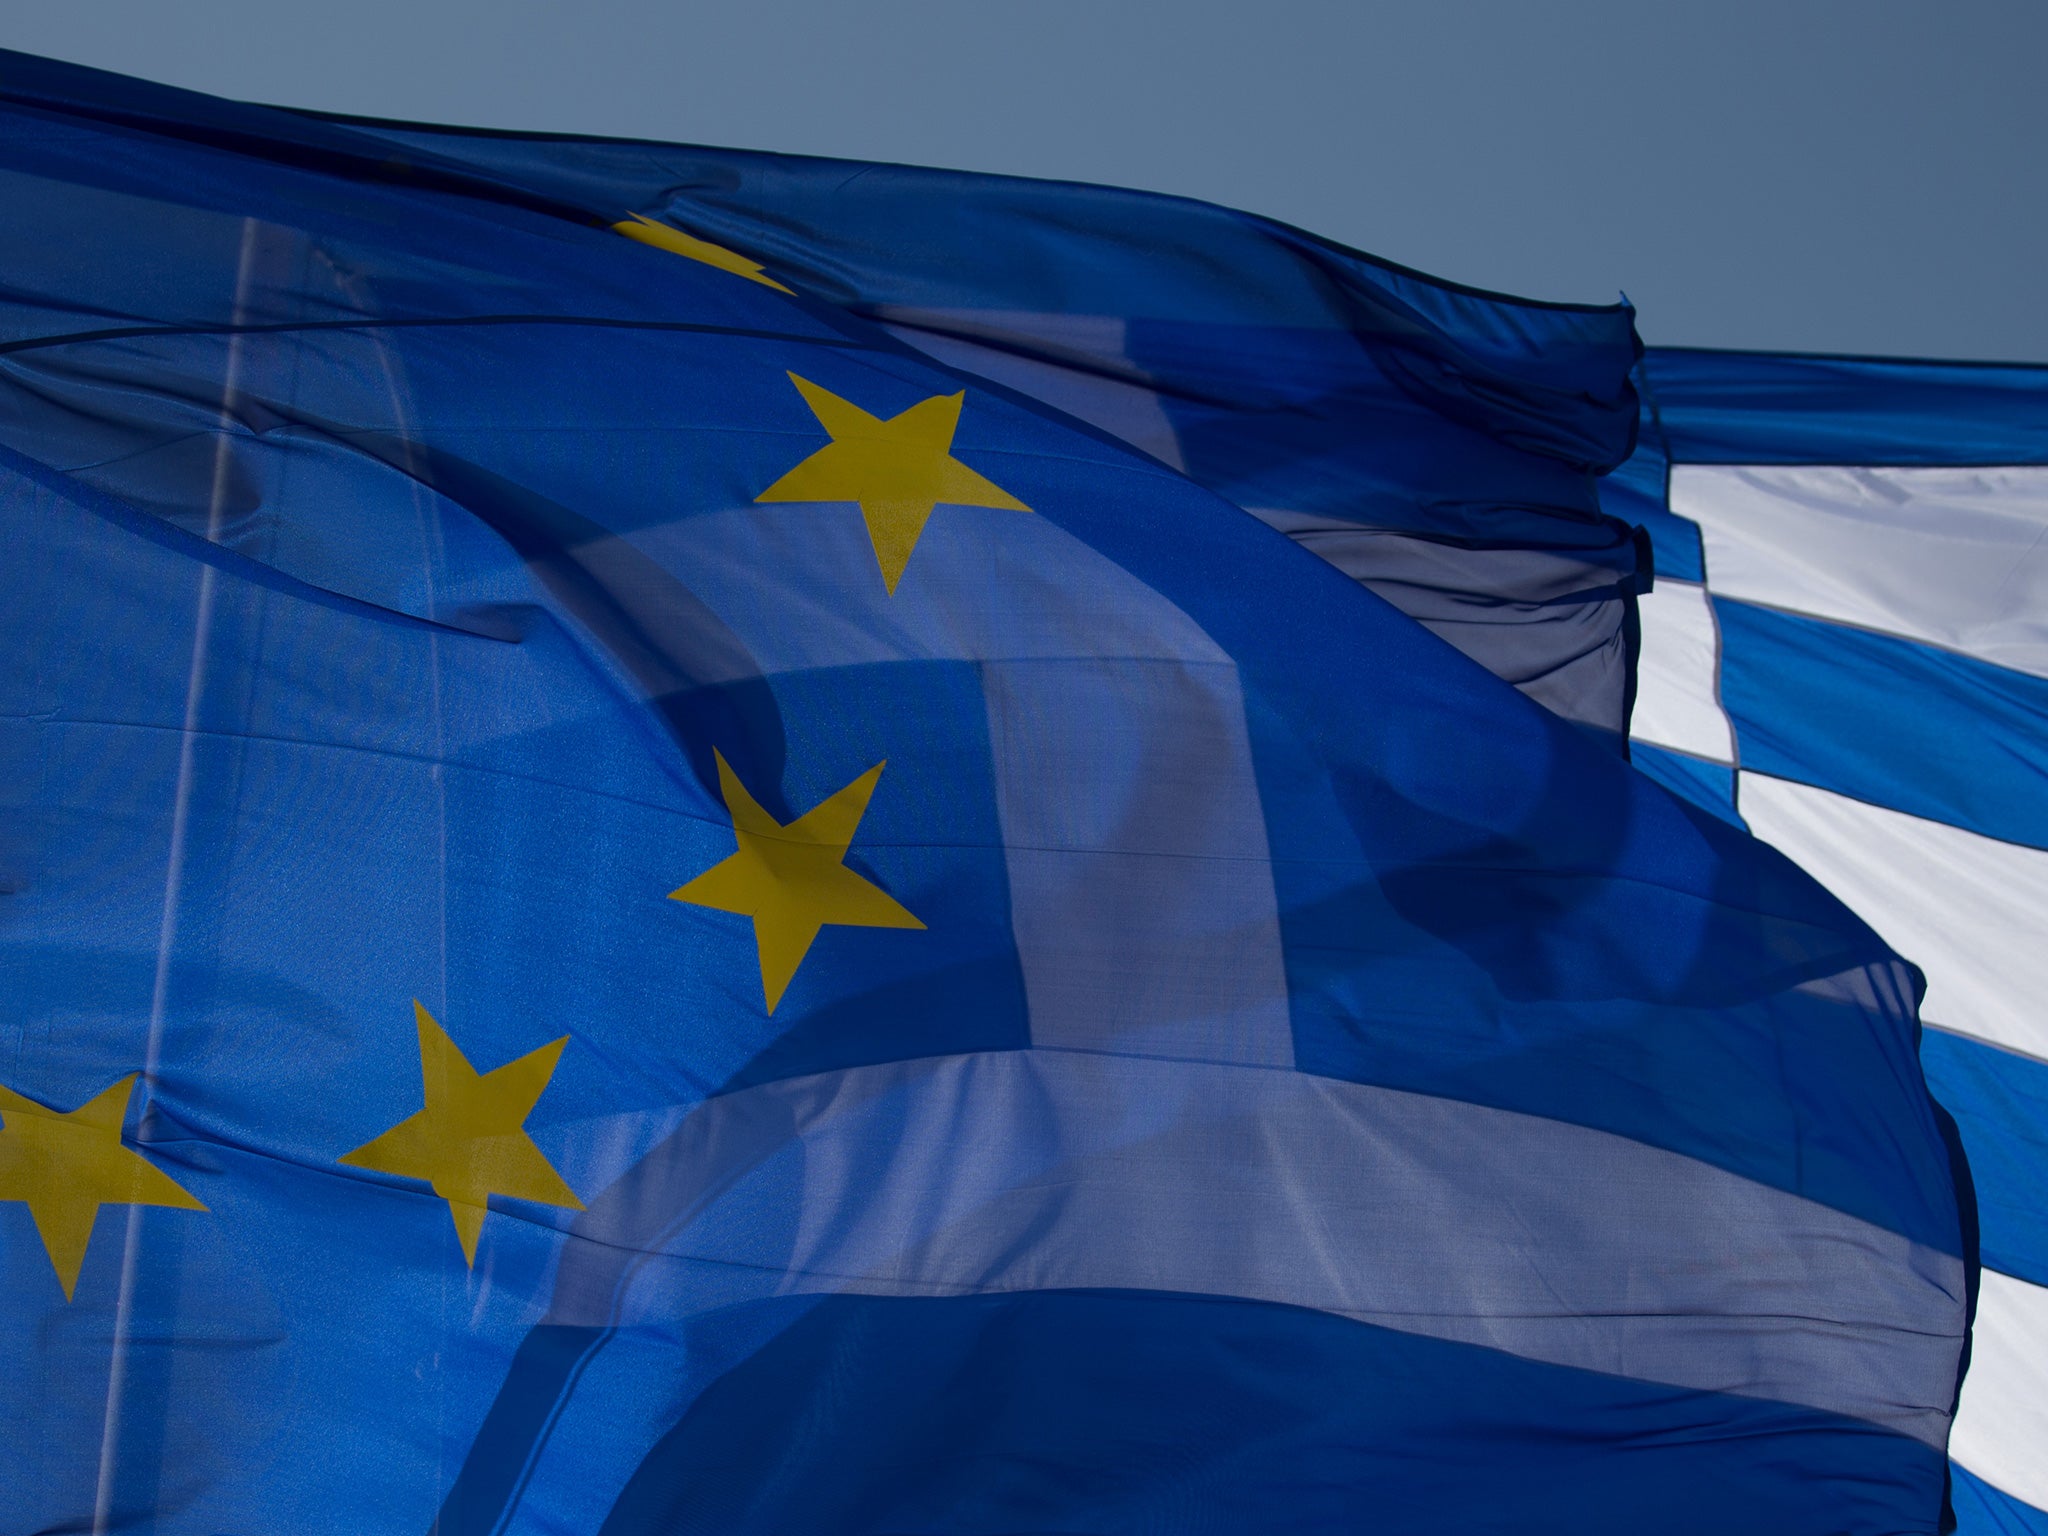 Germany and Greece succeeded in agreeing on a breakthrough of a four-month bailout extension